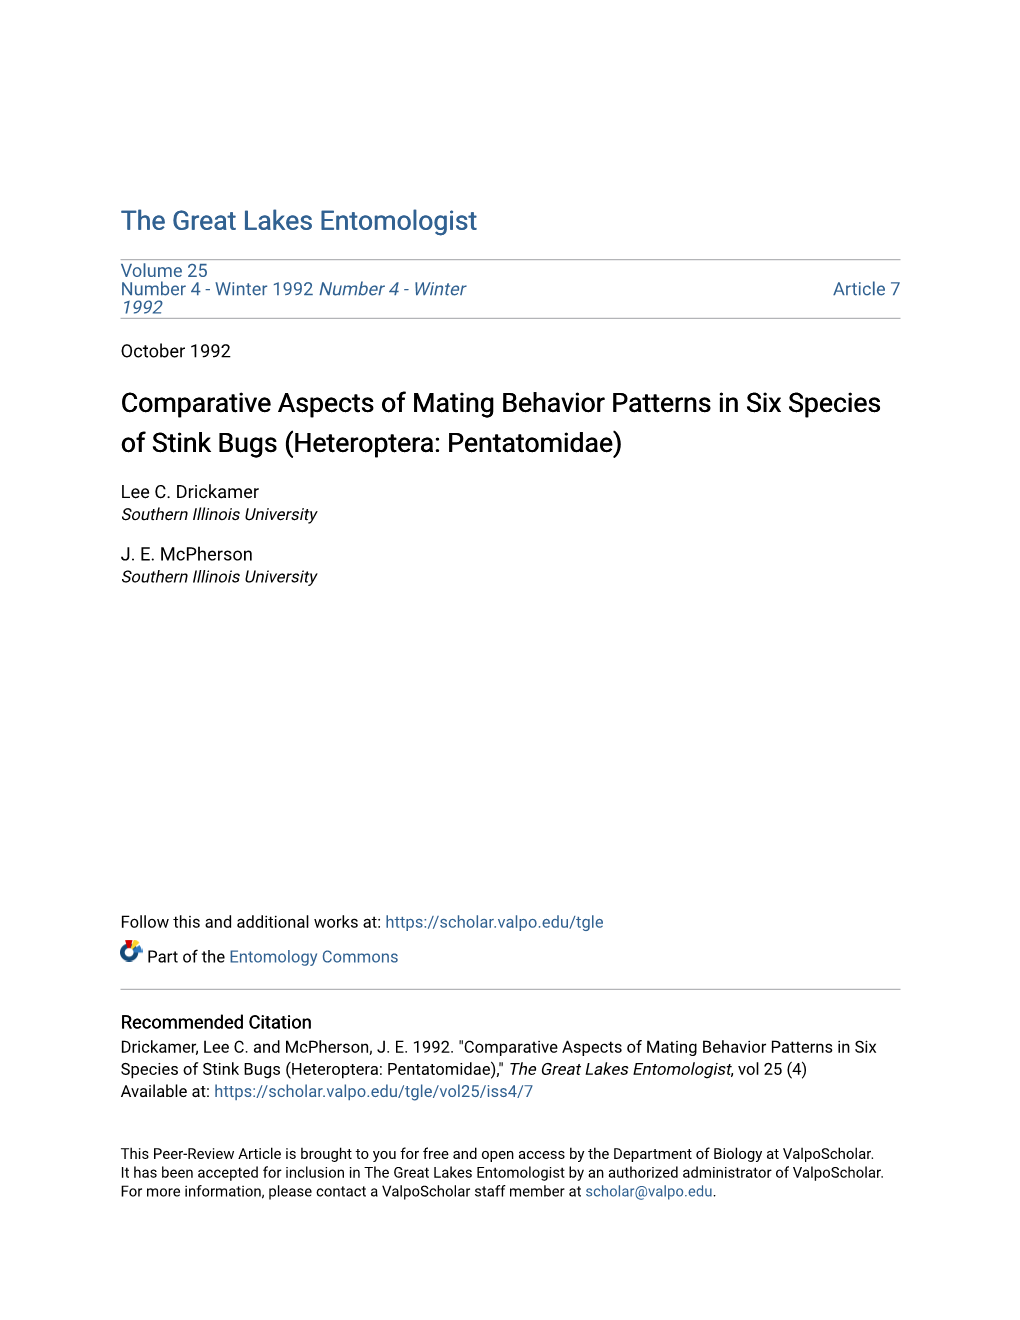 Comparative Aspects of Mating Behavior Patterns in Six Species of Stink Bugs (Heteroptera: Pentatomidae)